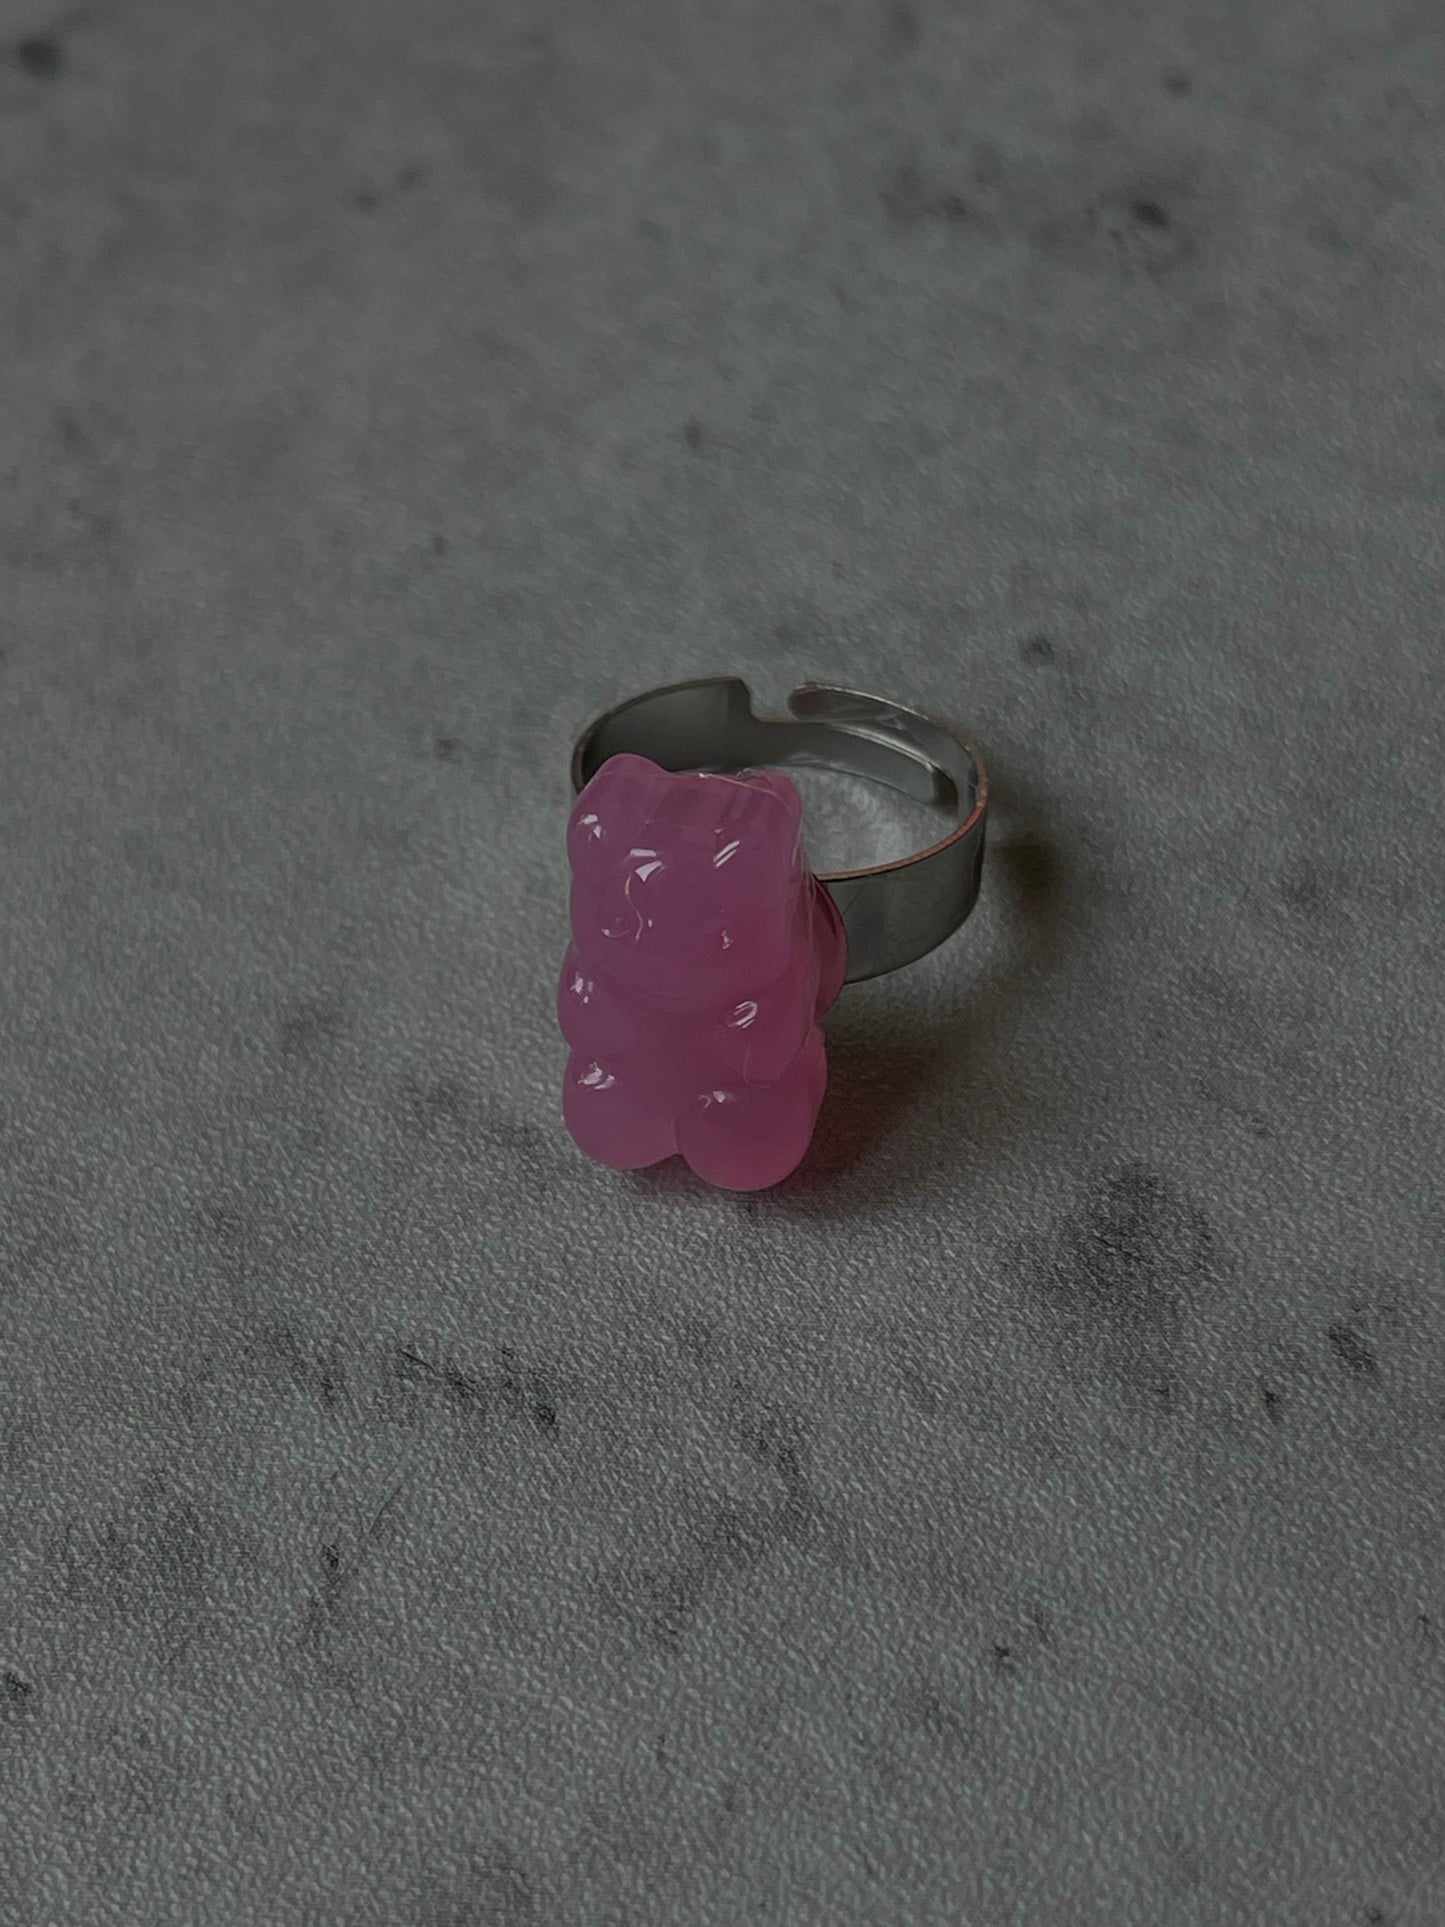 2005 Teddy ring (Pink/Mint Green)